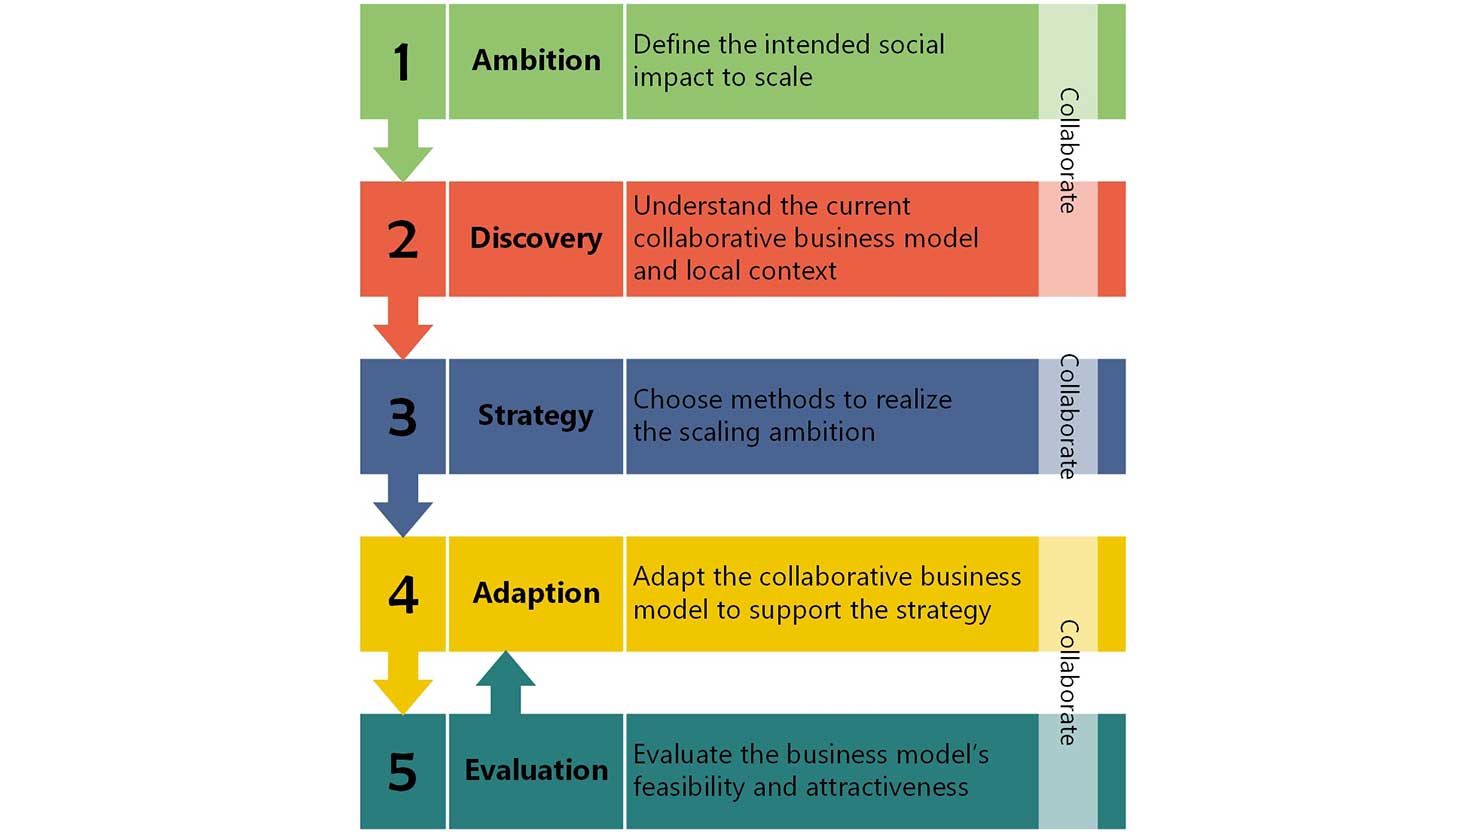 Five steps of the “collaborative business modelling for scaling inclusive business impact”